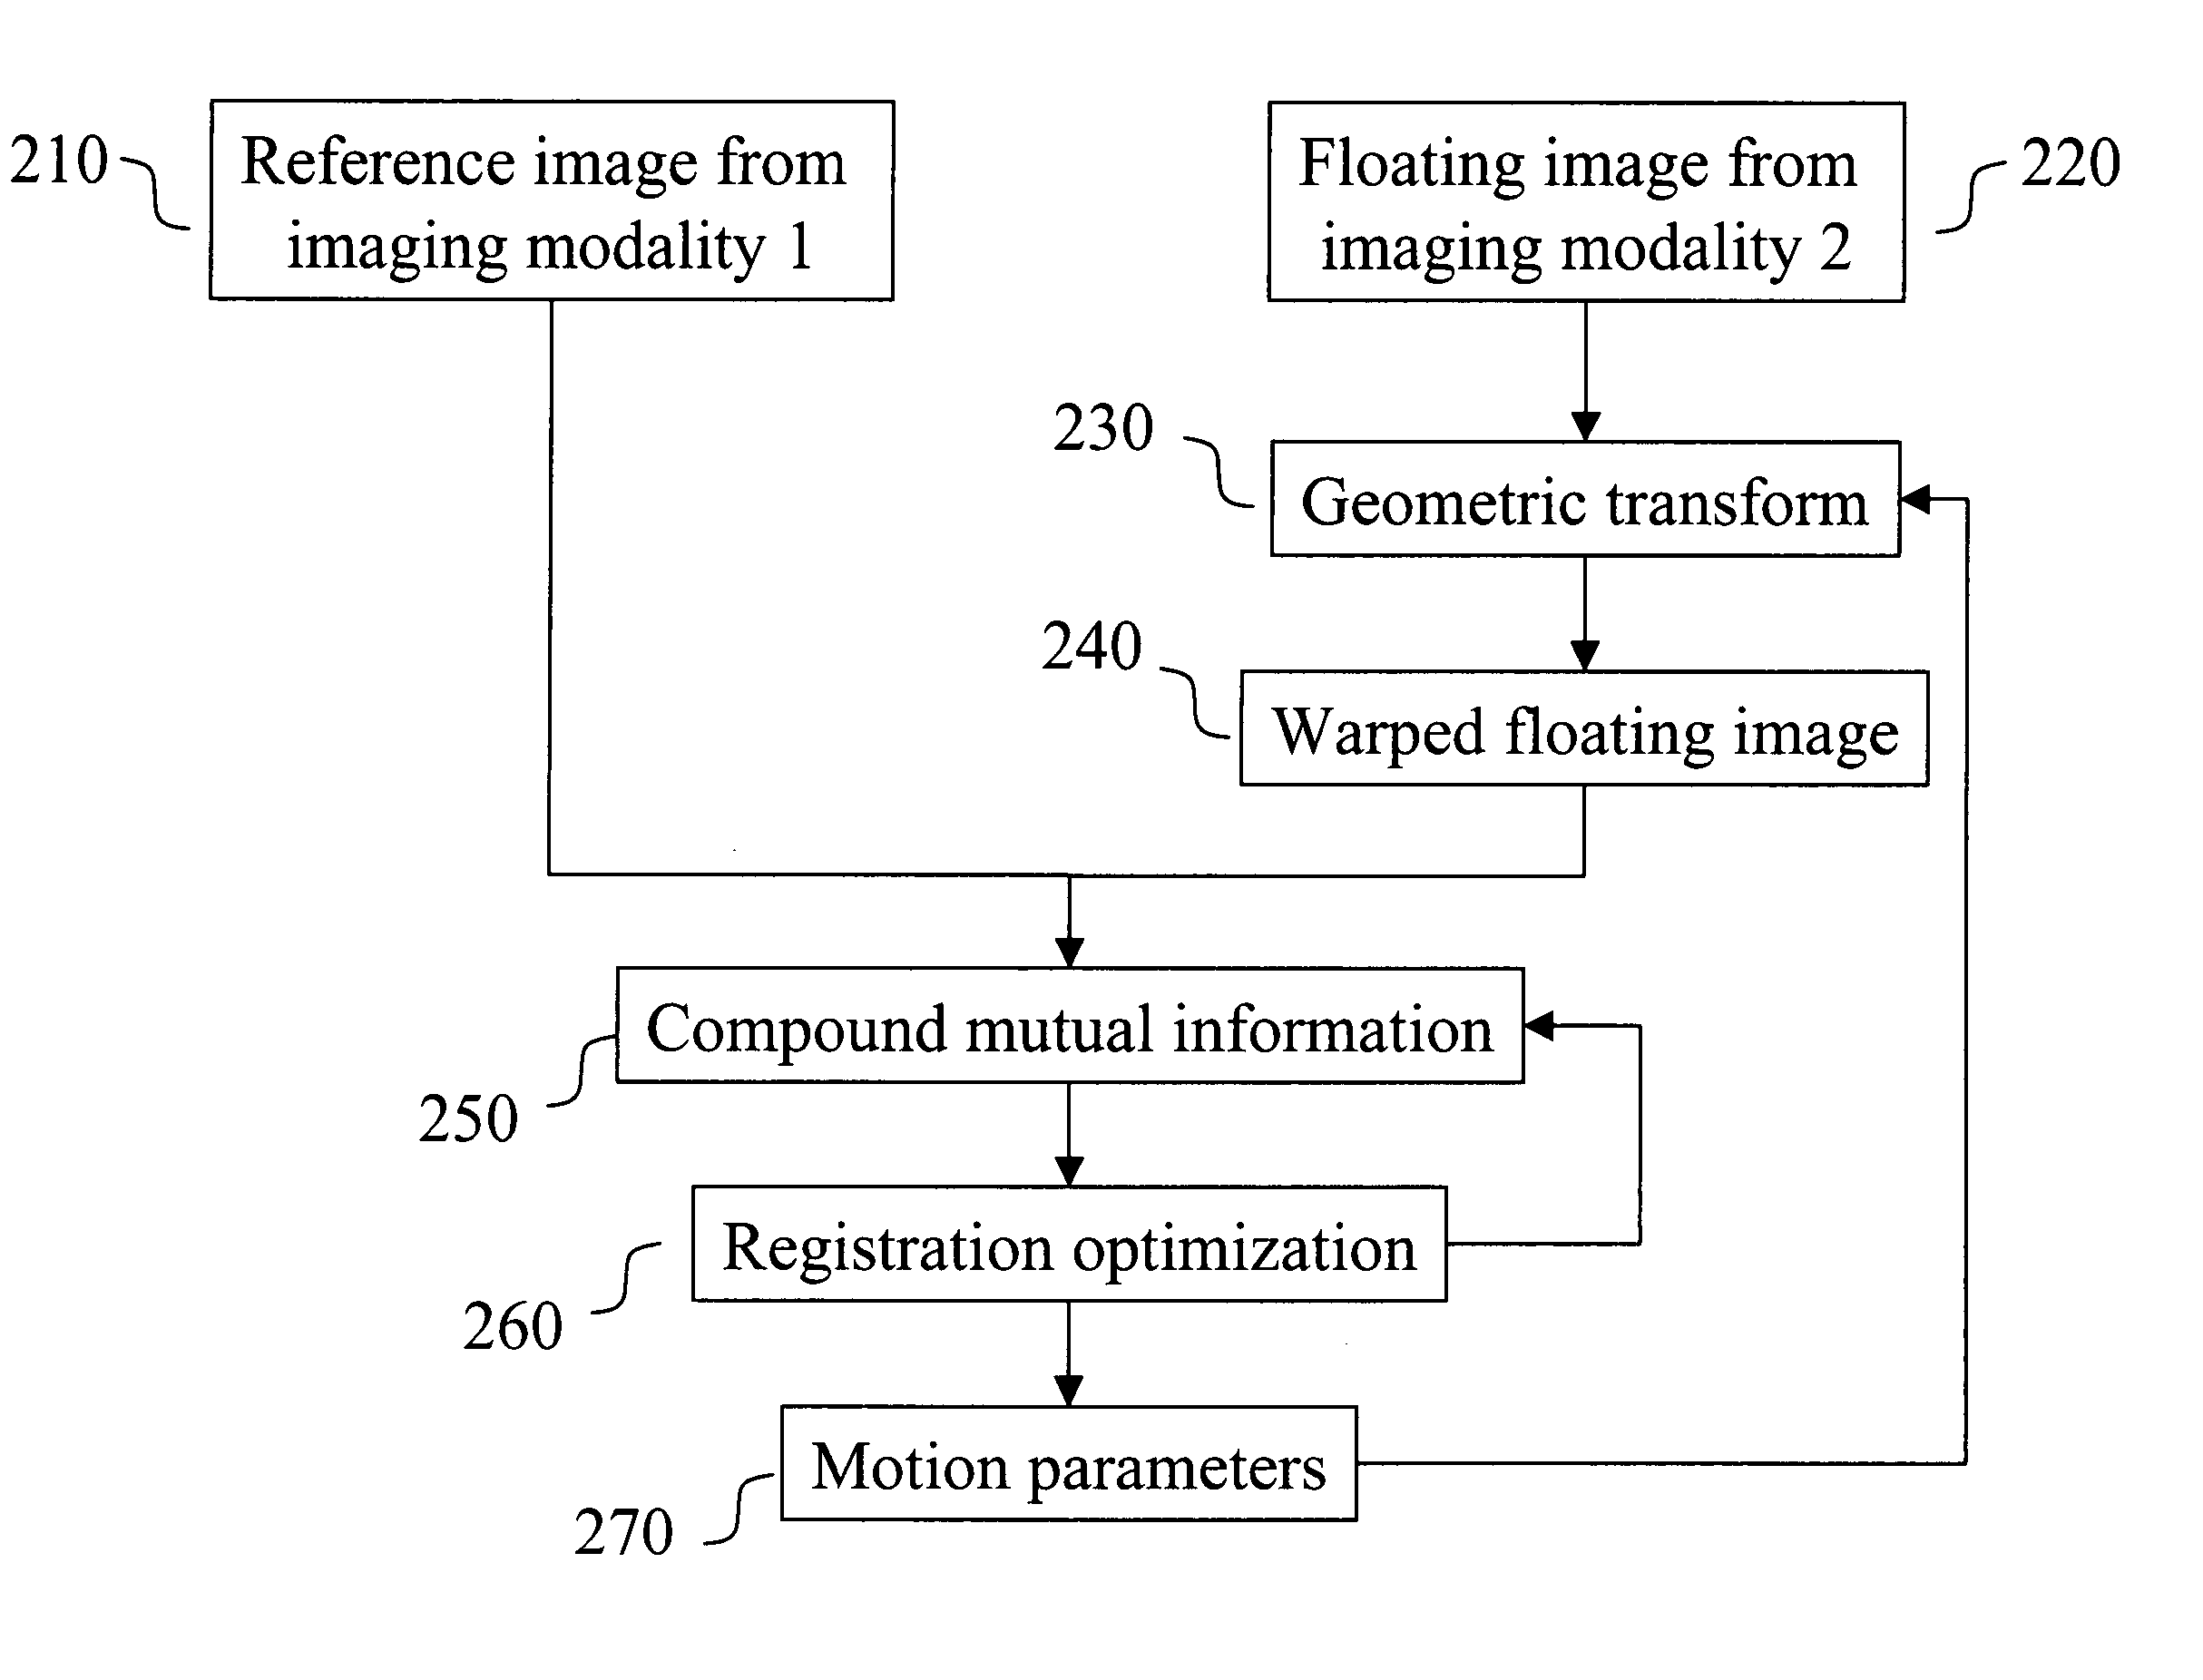 Multimodal image registration using compound mutual information